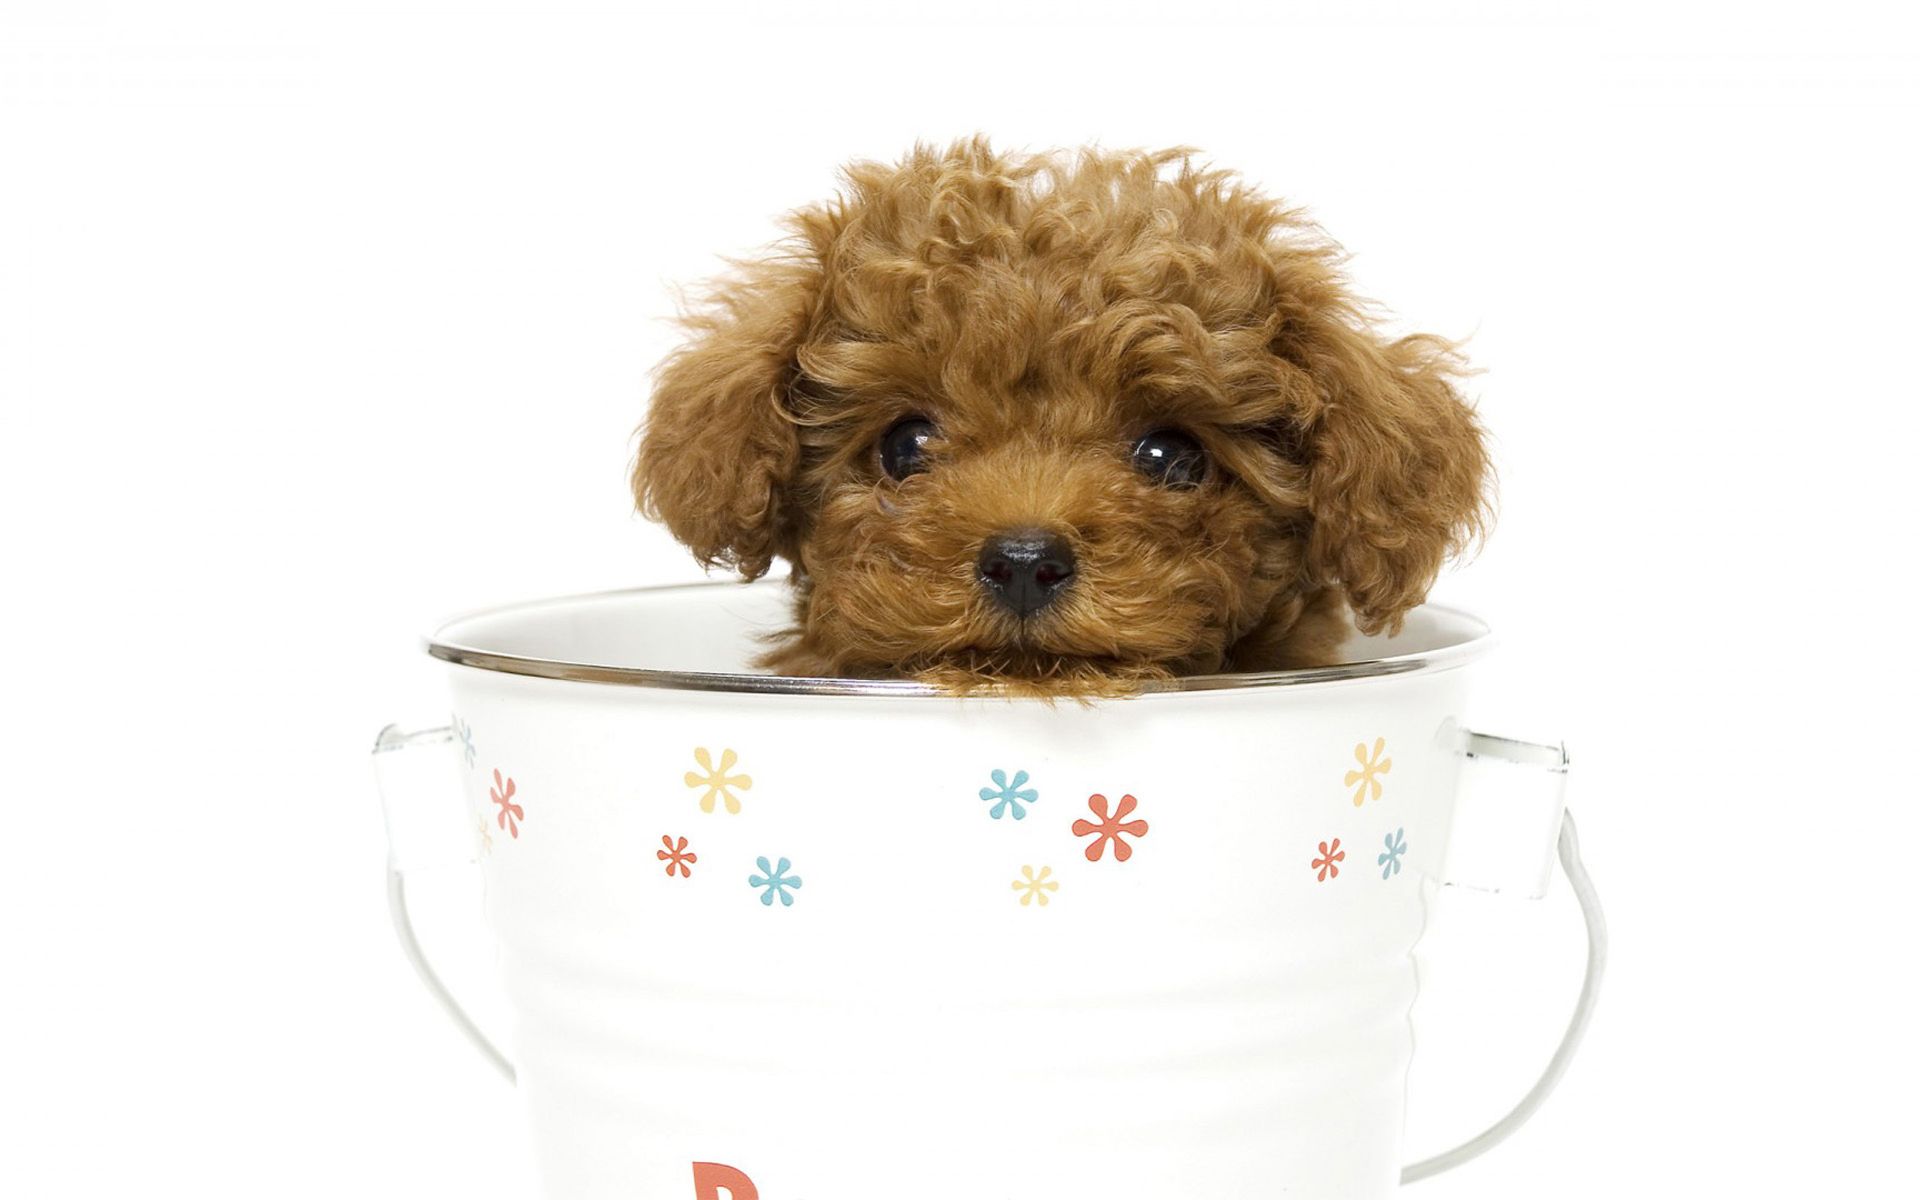 Teacup Poodle in a Teacup HD Wallpaper. Background Image